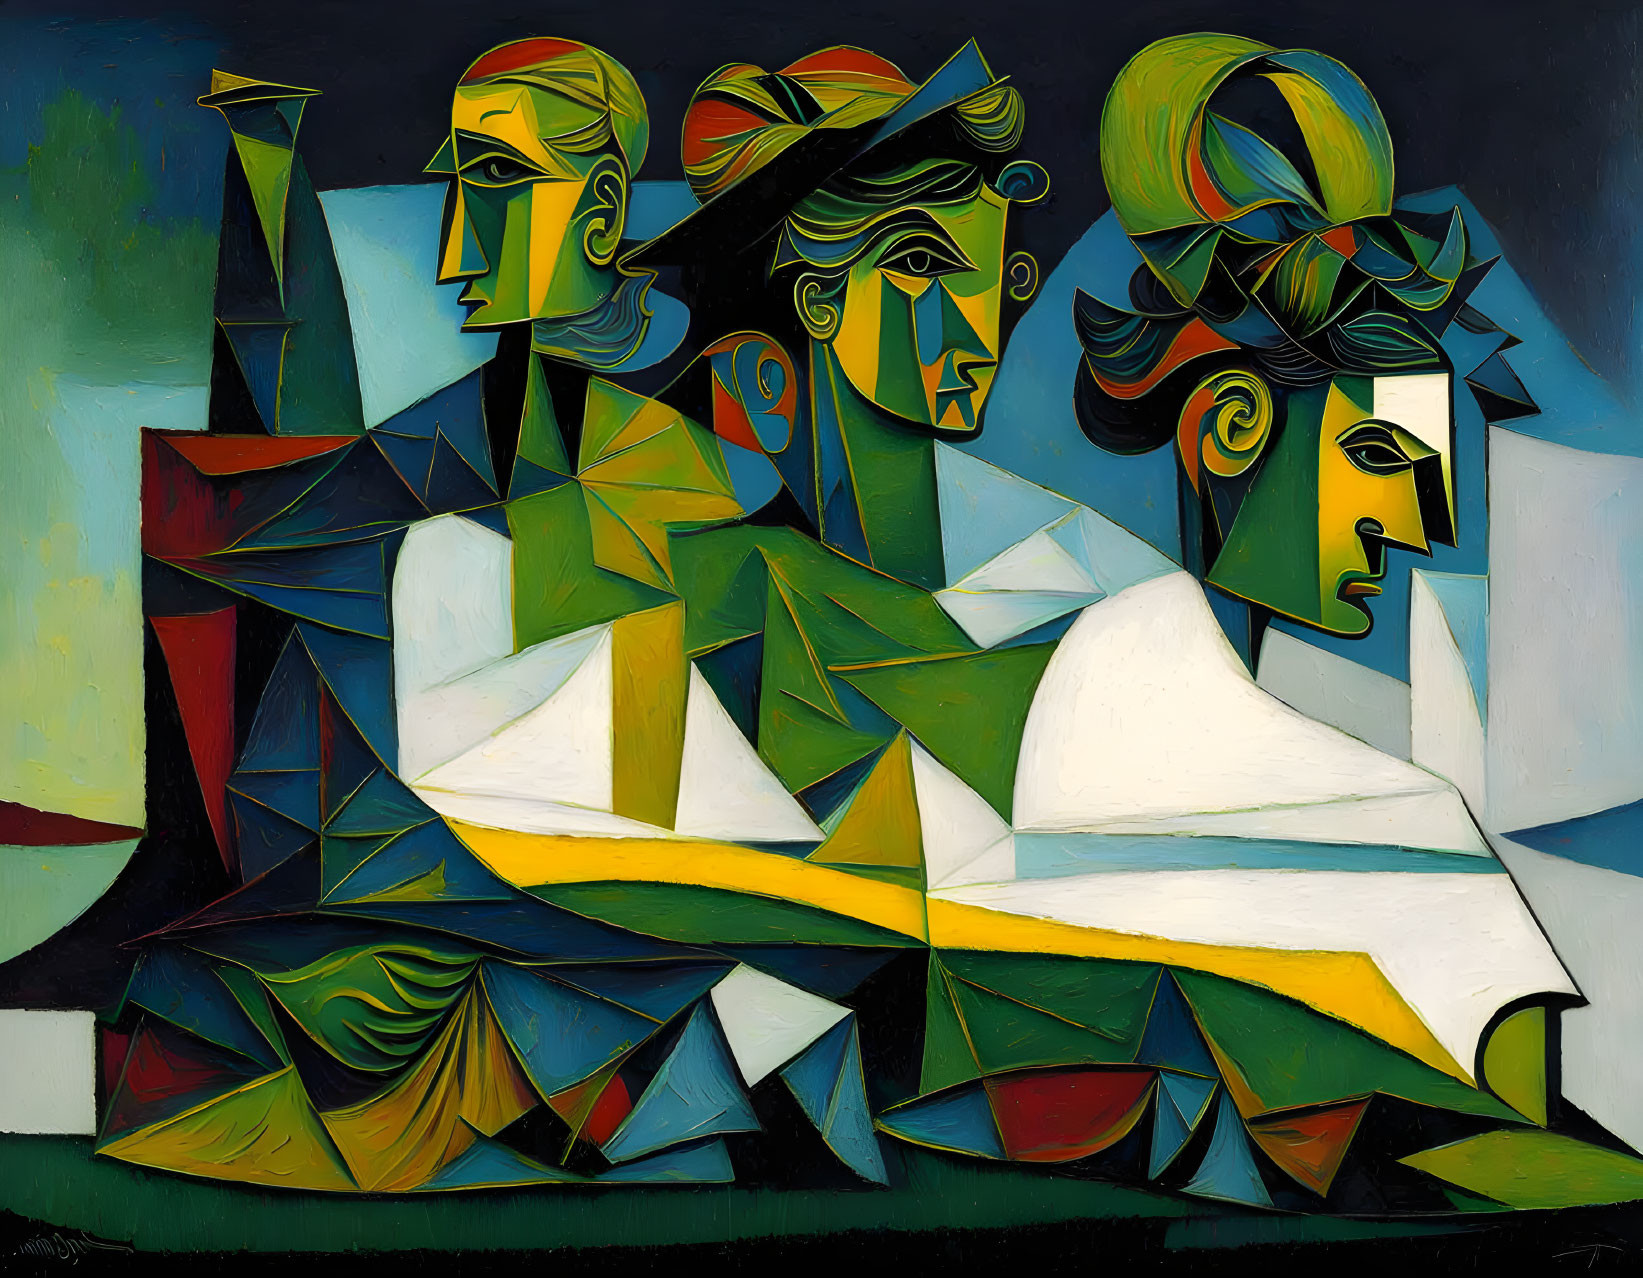 Vibrant cubist painting with three stylized figures